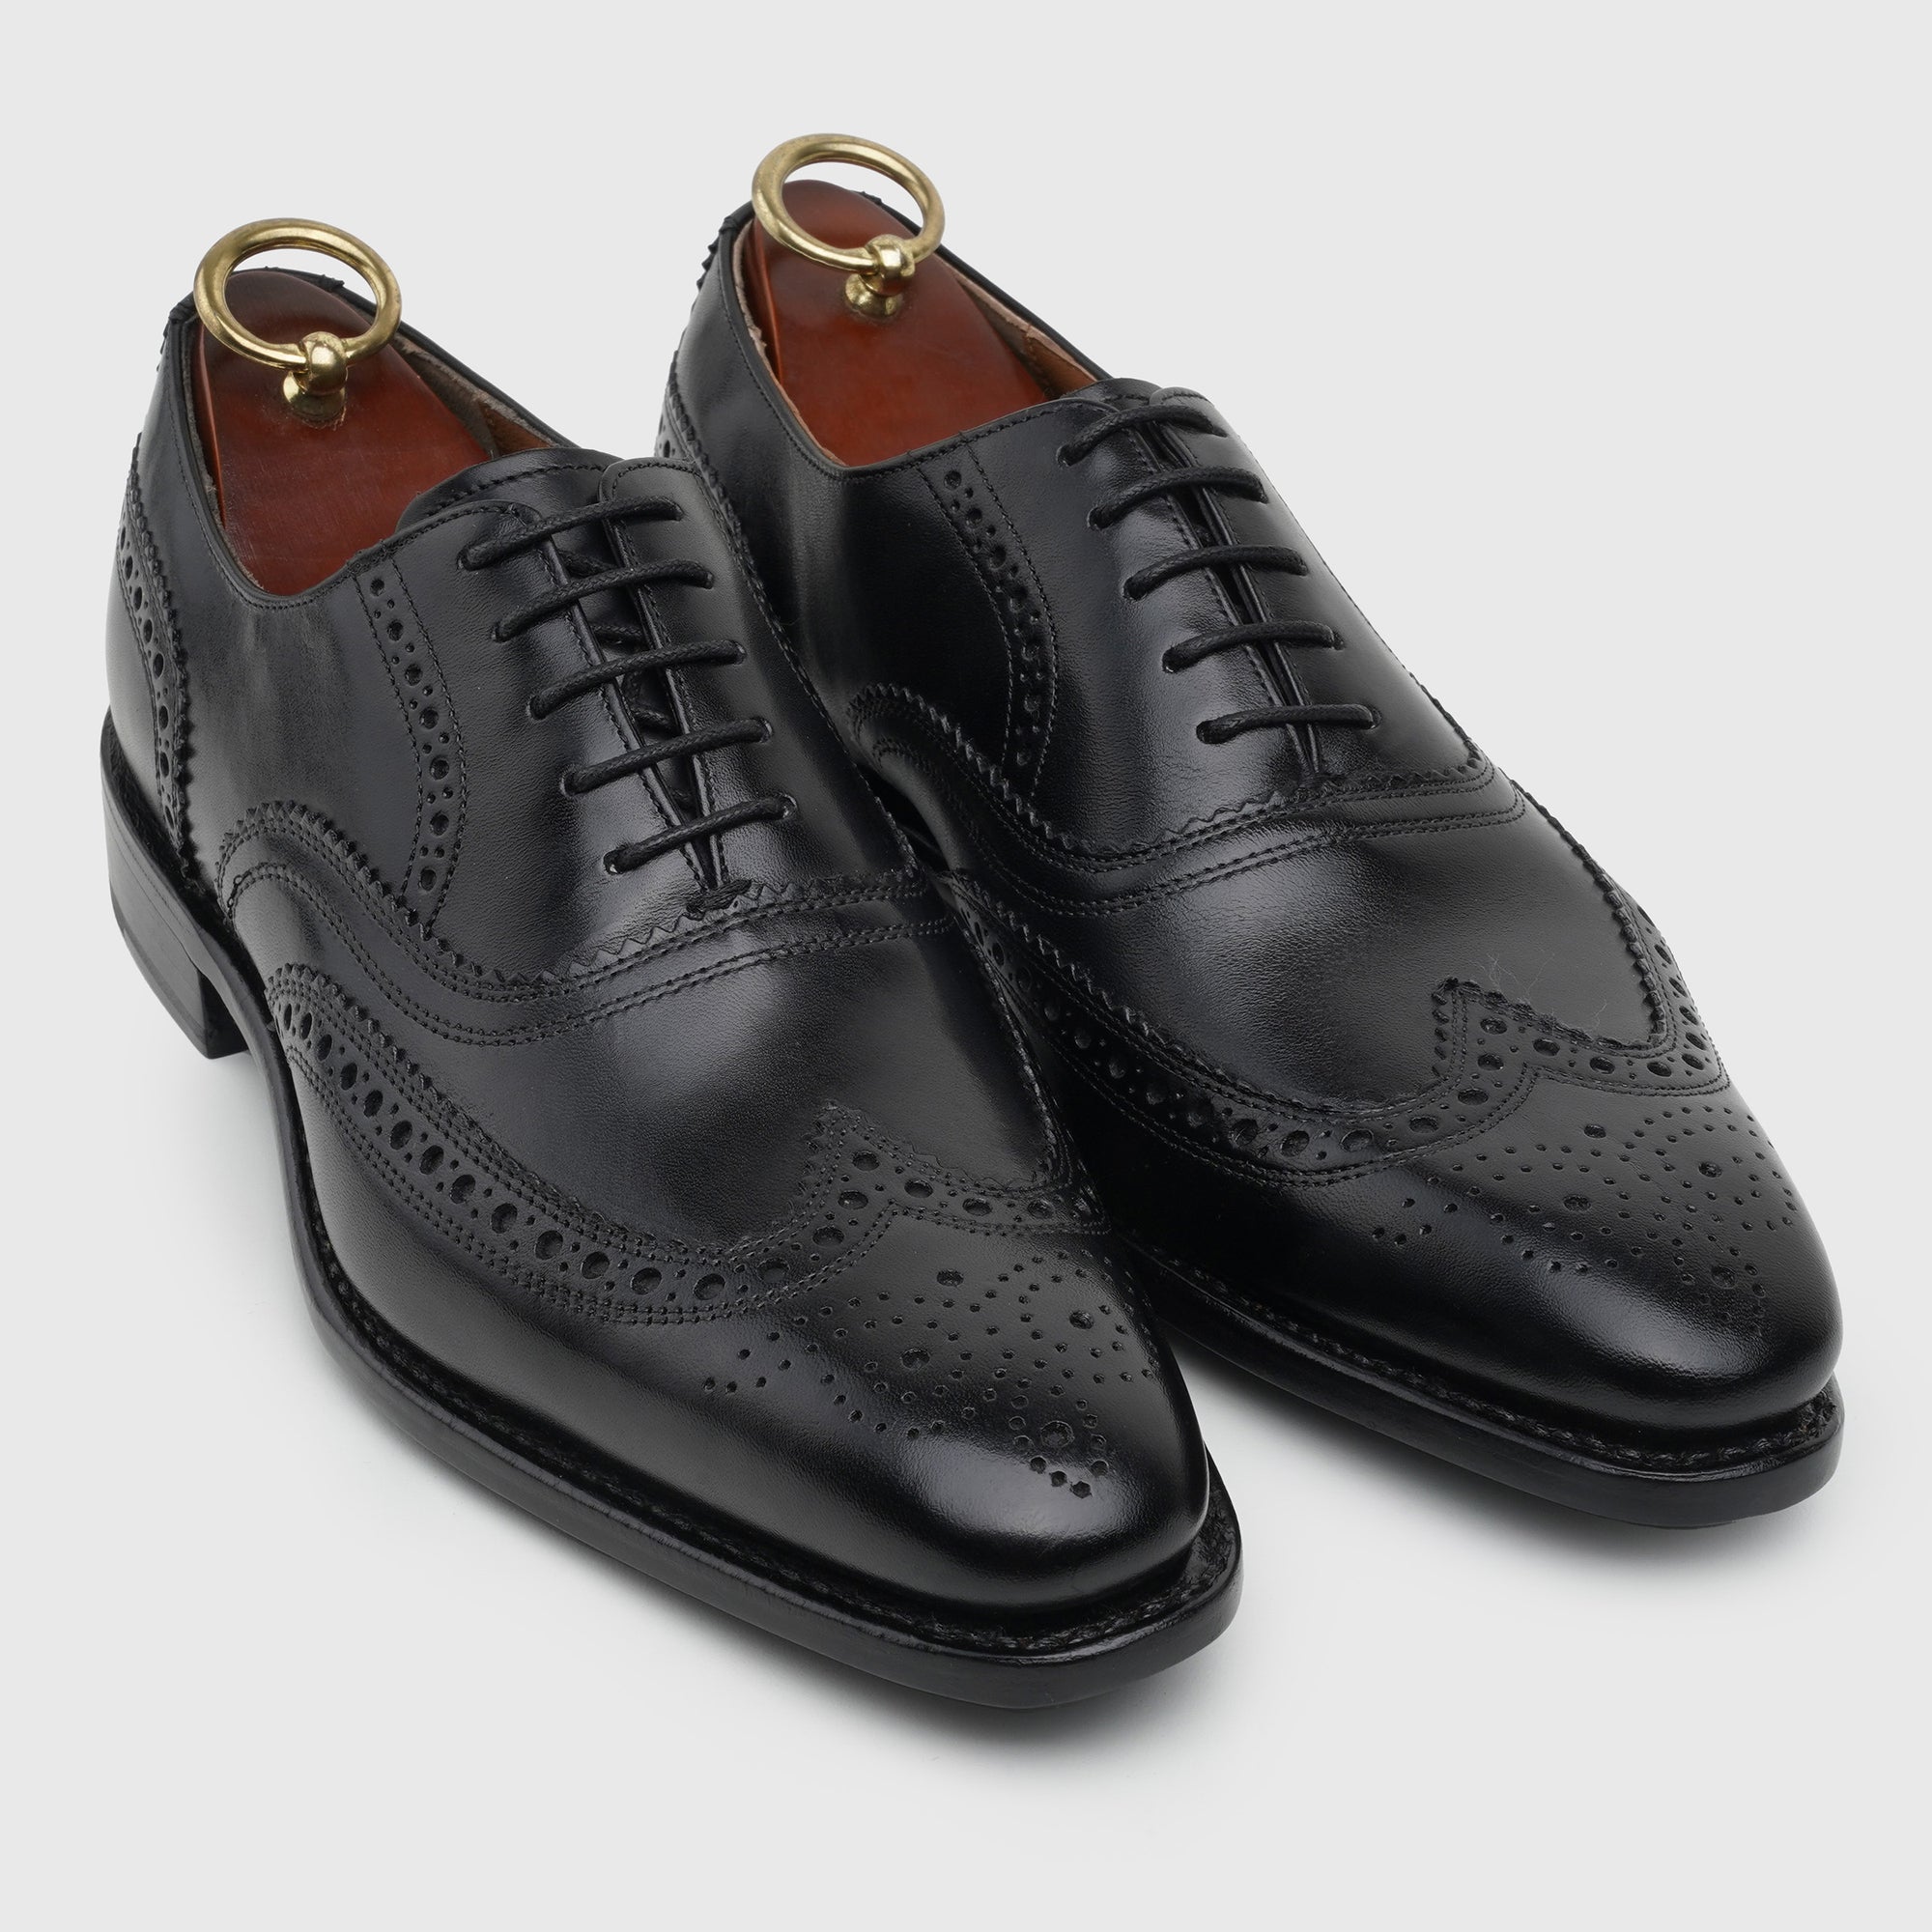 Wingtip Full Brogue Oxfords Black 453 Goodyear Welted